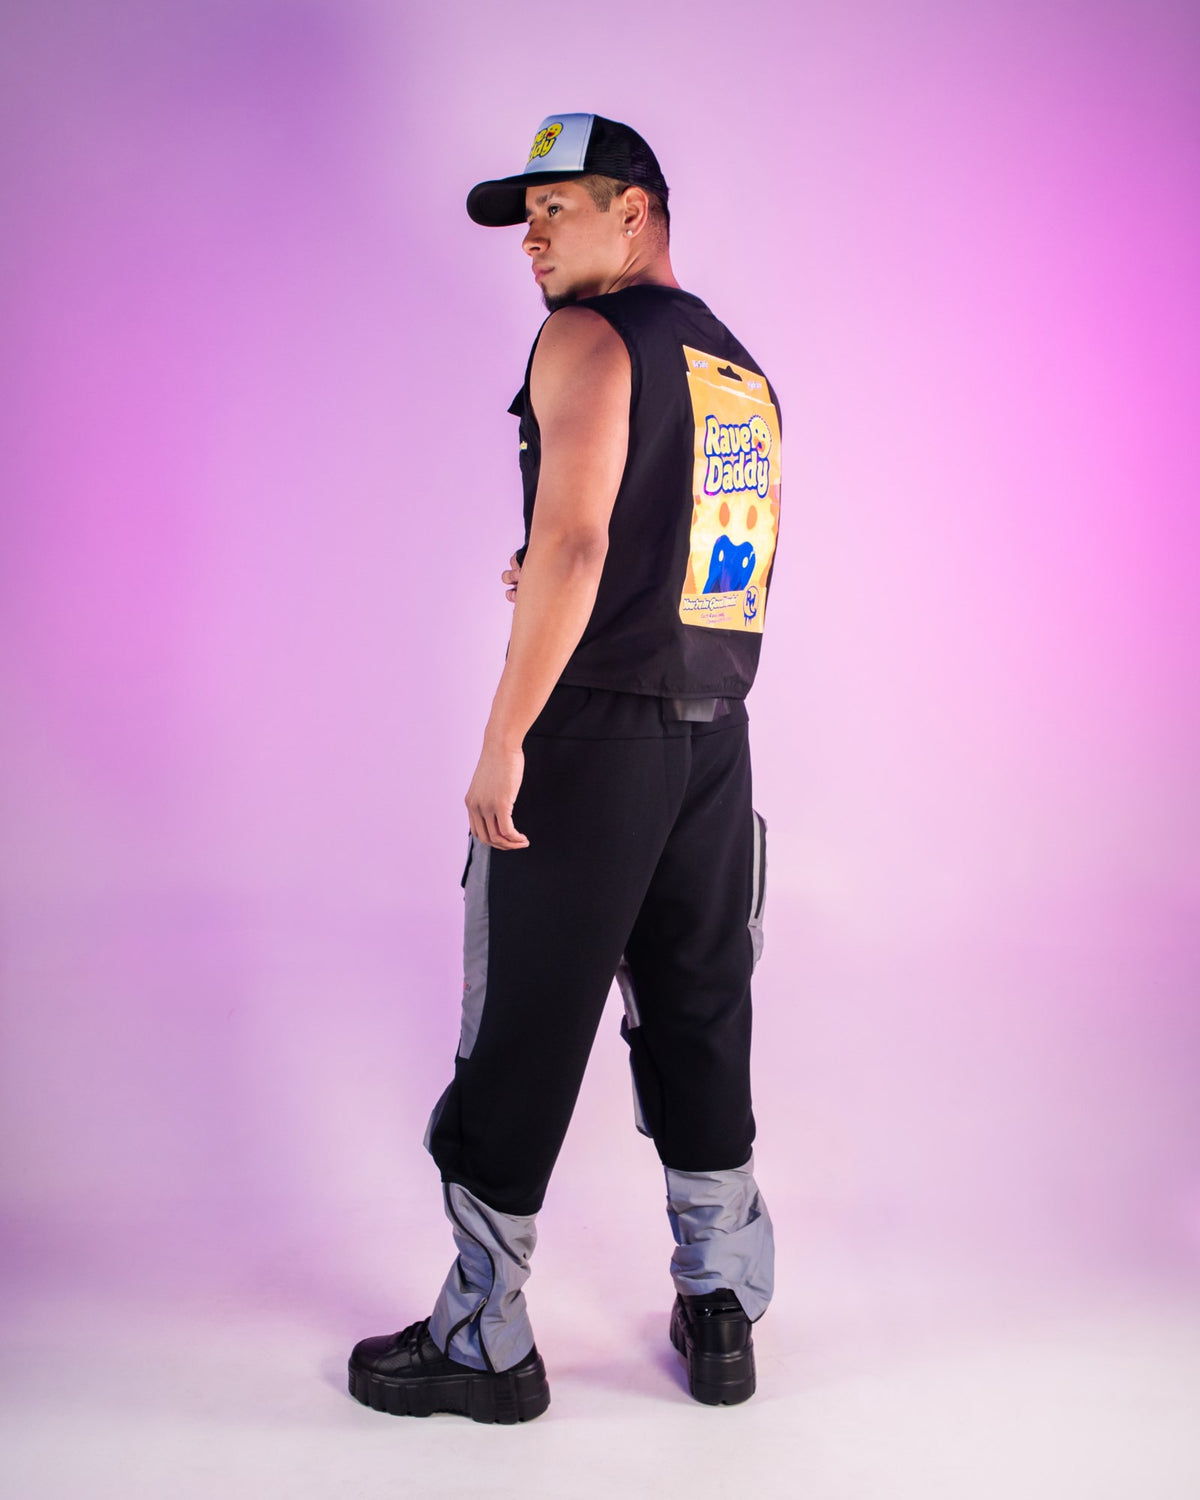 Rave Daddy Yellow and Black Fishnet Utility Vest